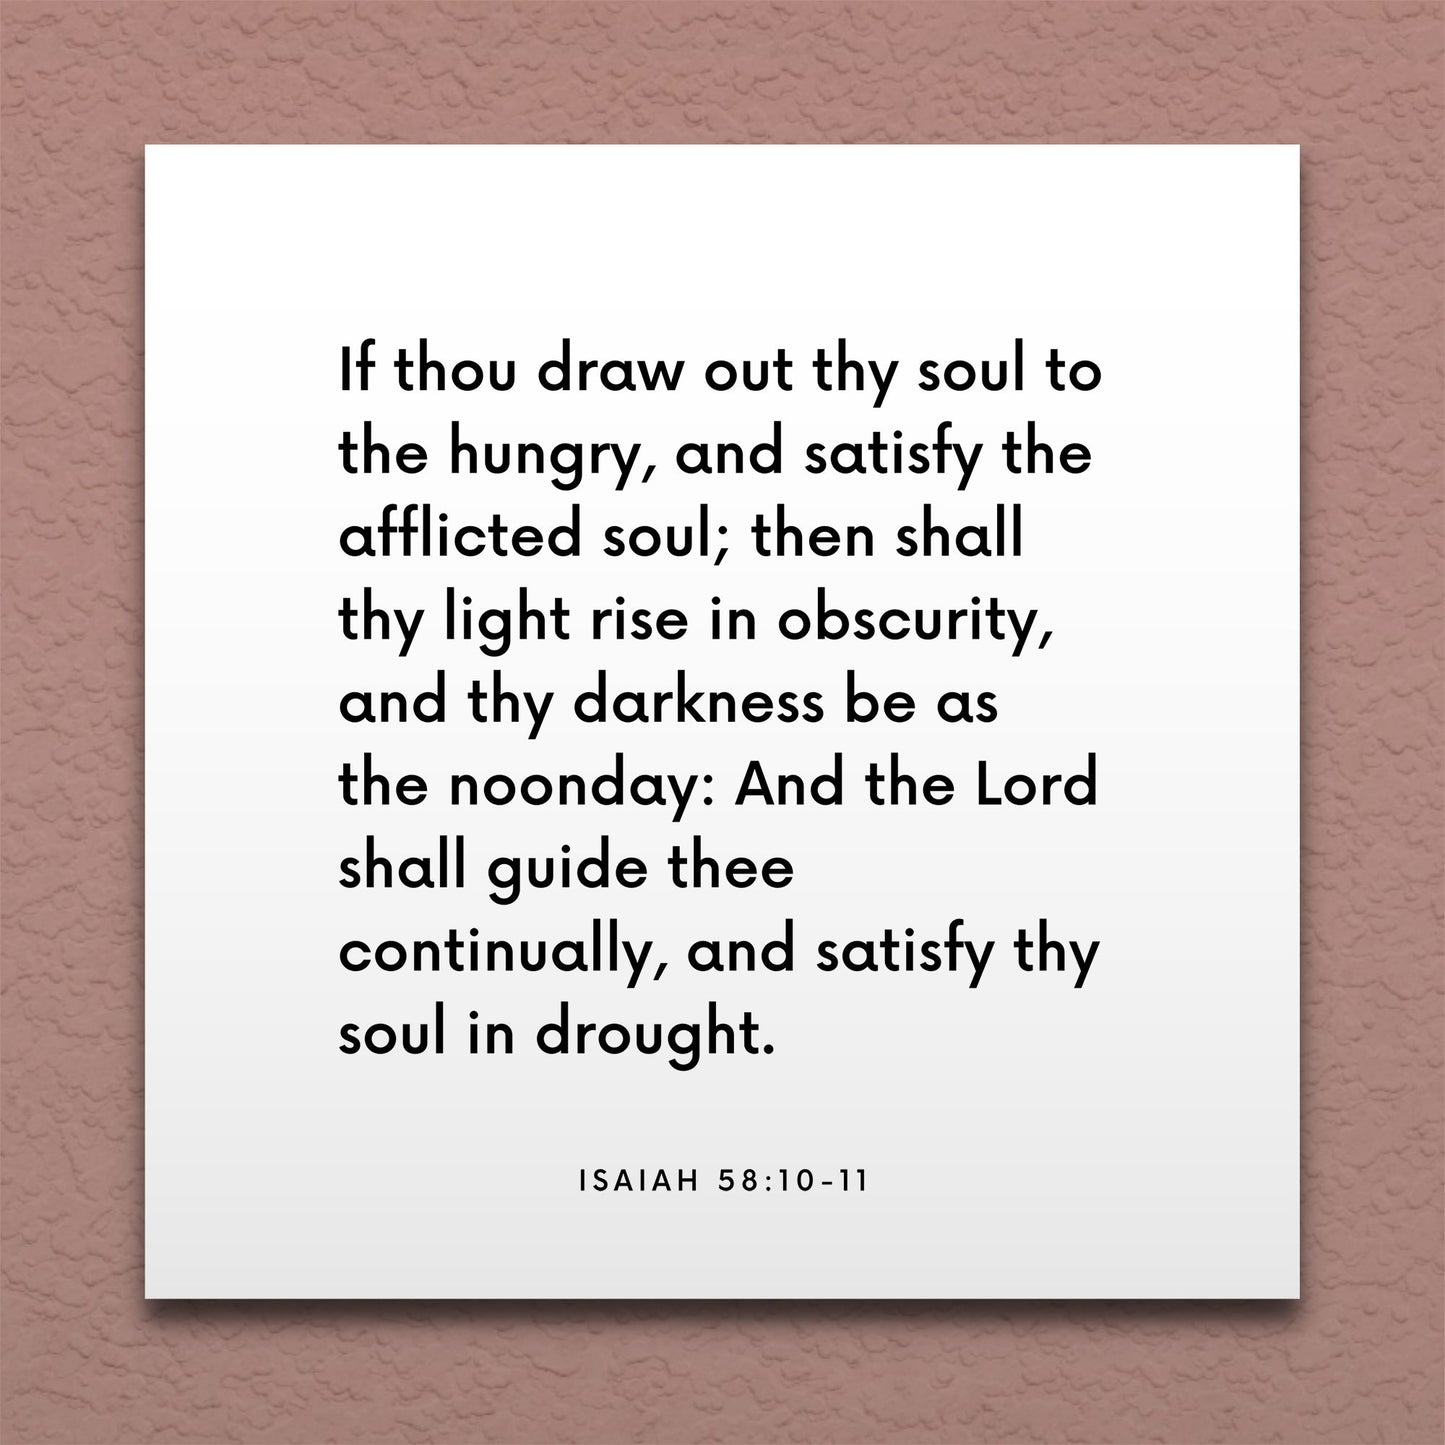 Wall-mounted scripture tile for Isaiah 58:10-11 - "If thou draw out thy soul to the hungry"